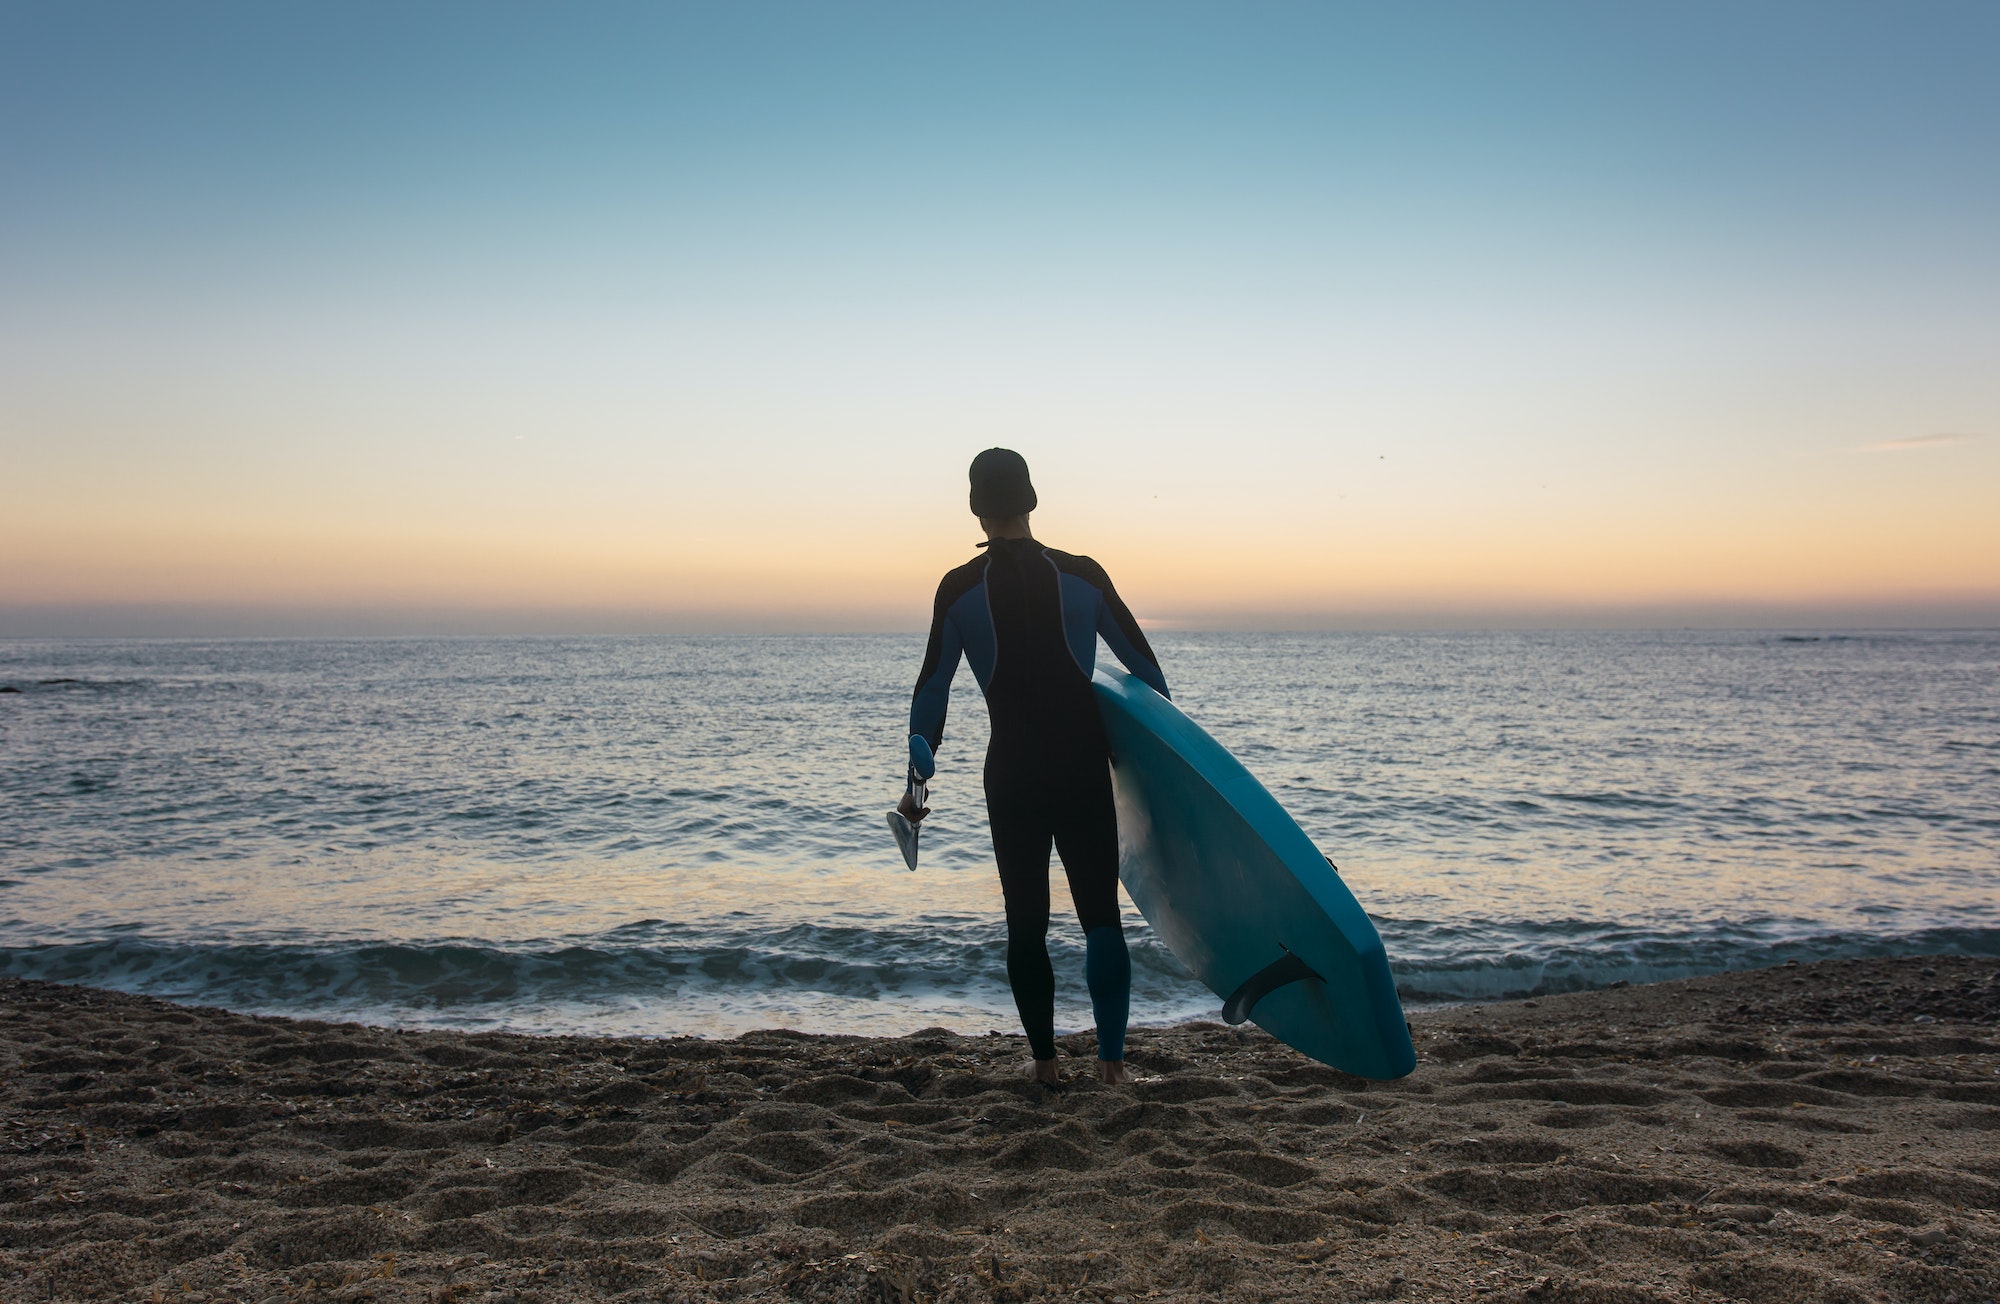 Man practicing paddle surfing with neoprene in a sunrise